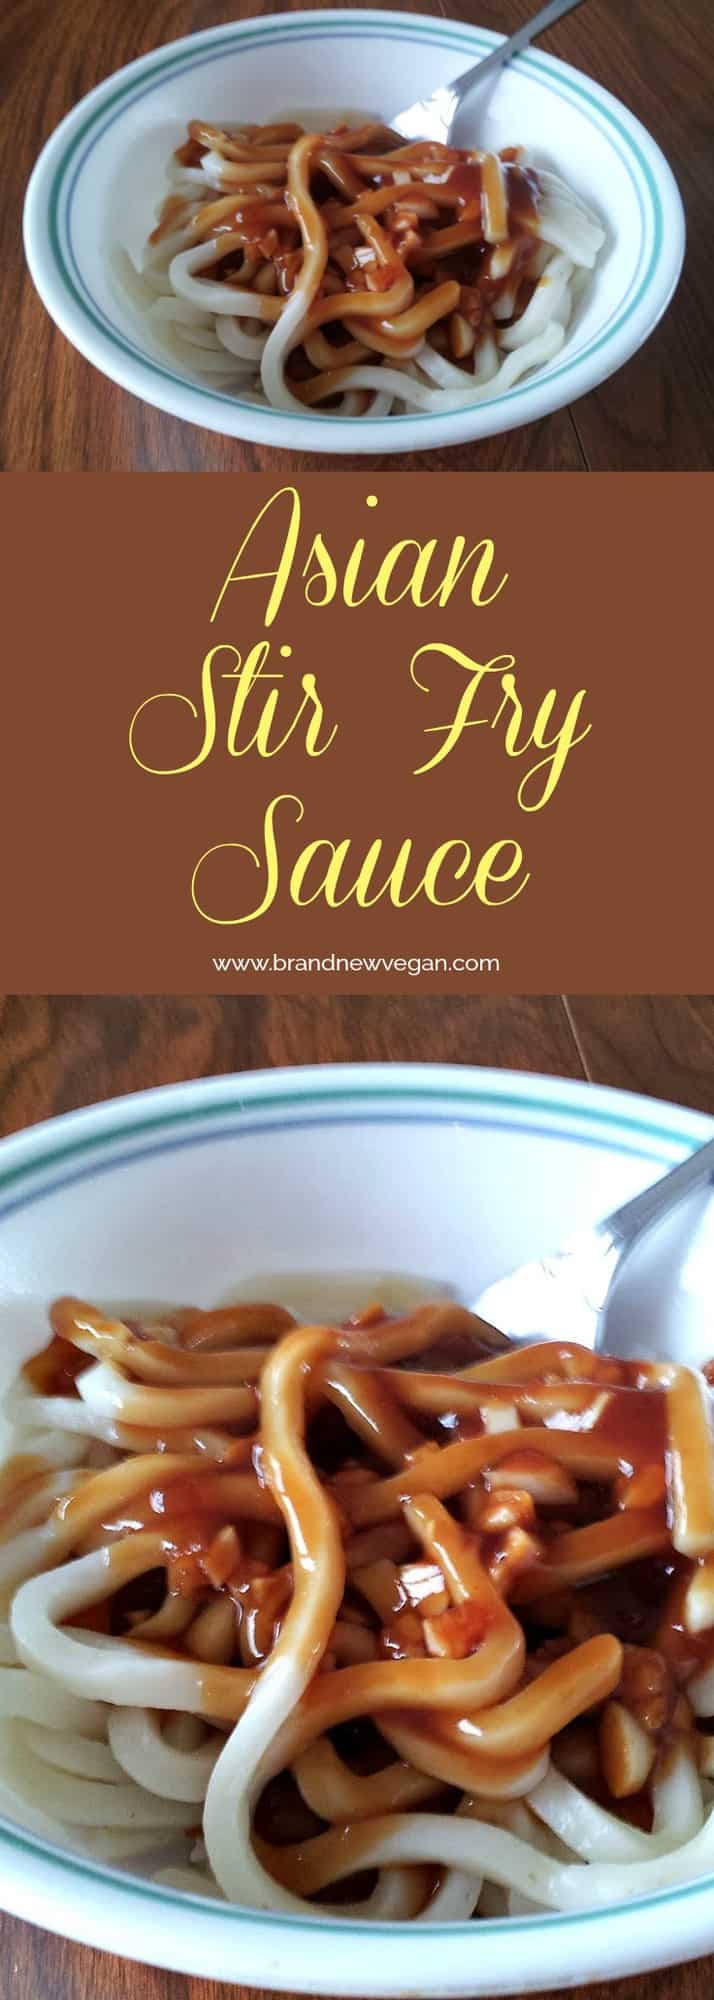 This Asian Stir Fry Sauce is completely vegan, low-fat, easy to make, and very, very tasty. As an added benefit, the molasses gives it a nice iron kick, a mineral many Vegans worry about when switching their diets to plant-based.